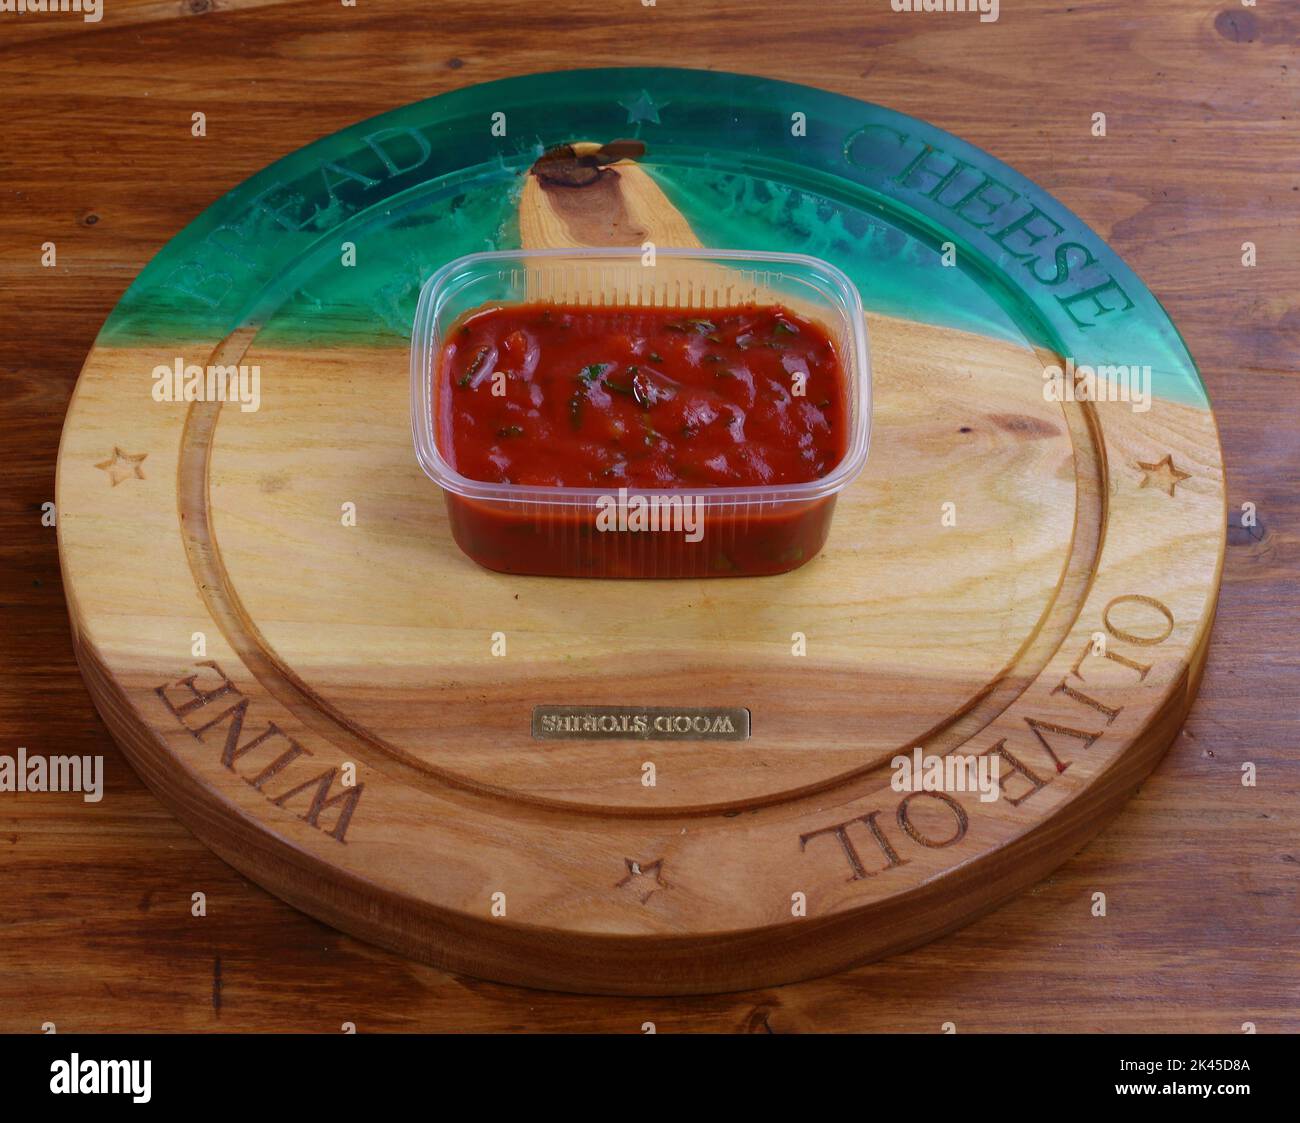 Ketchup on a wooden background in a plastic box Stock Photo